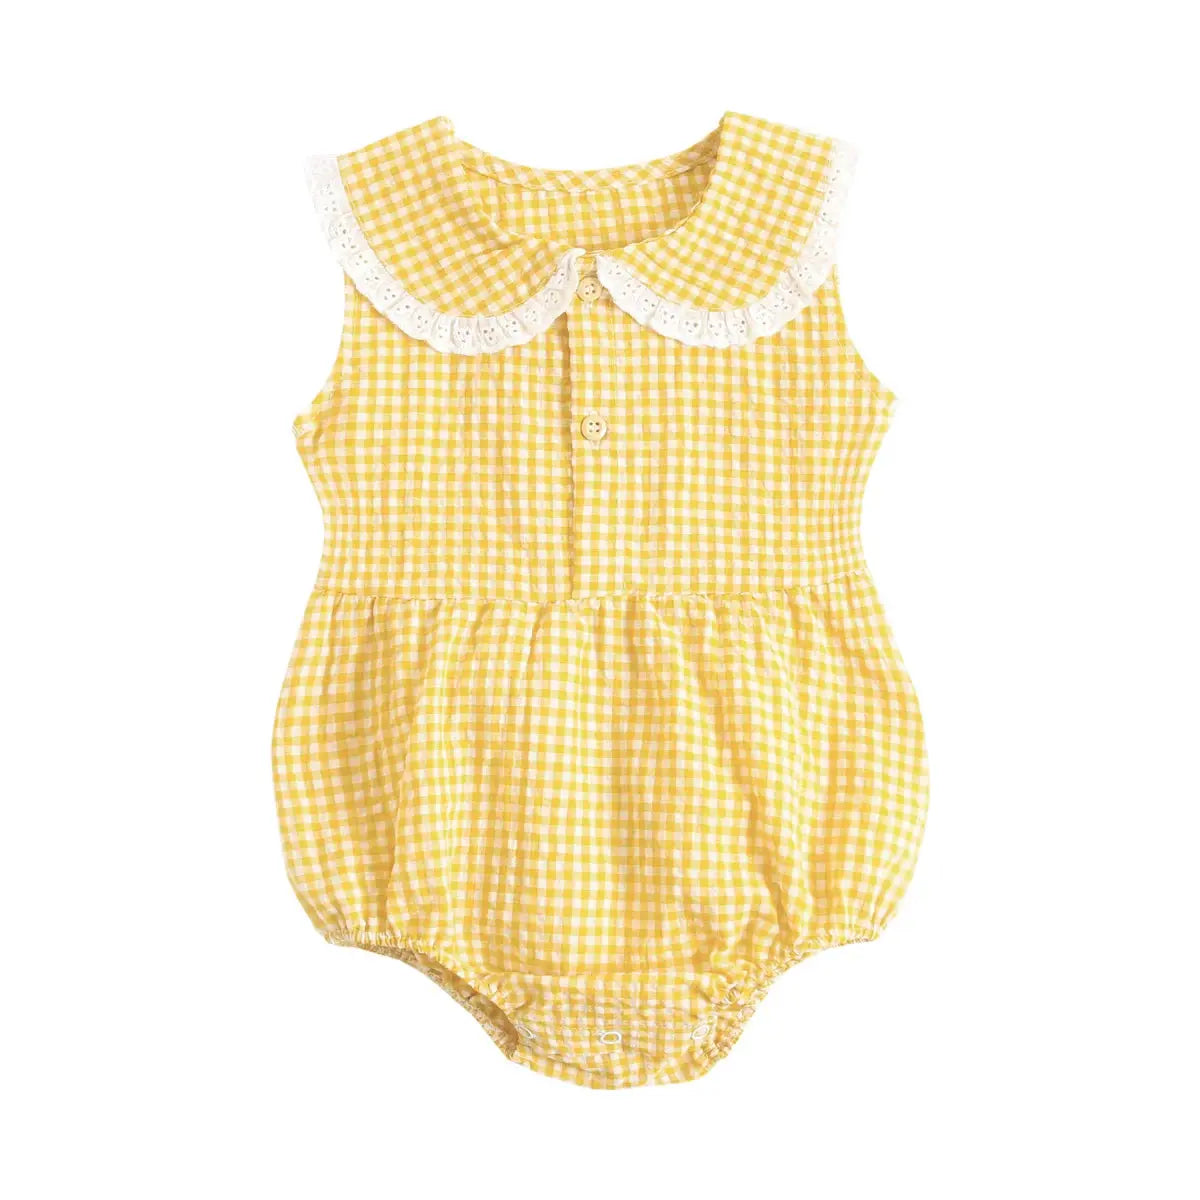 Spring &amp; Summer Baby Onesie by Soulful Trading, yellow and white gingham with a lace collar and button detail, isolated on a white background.